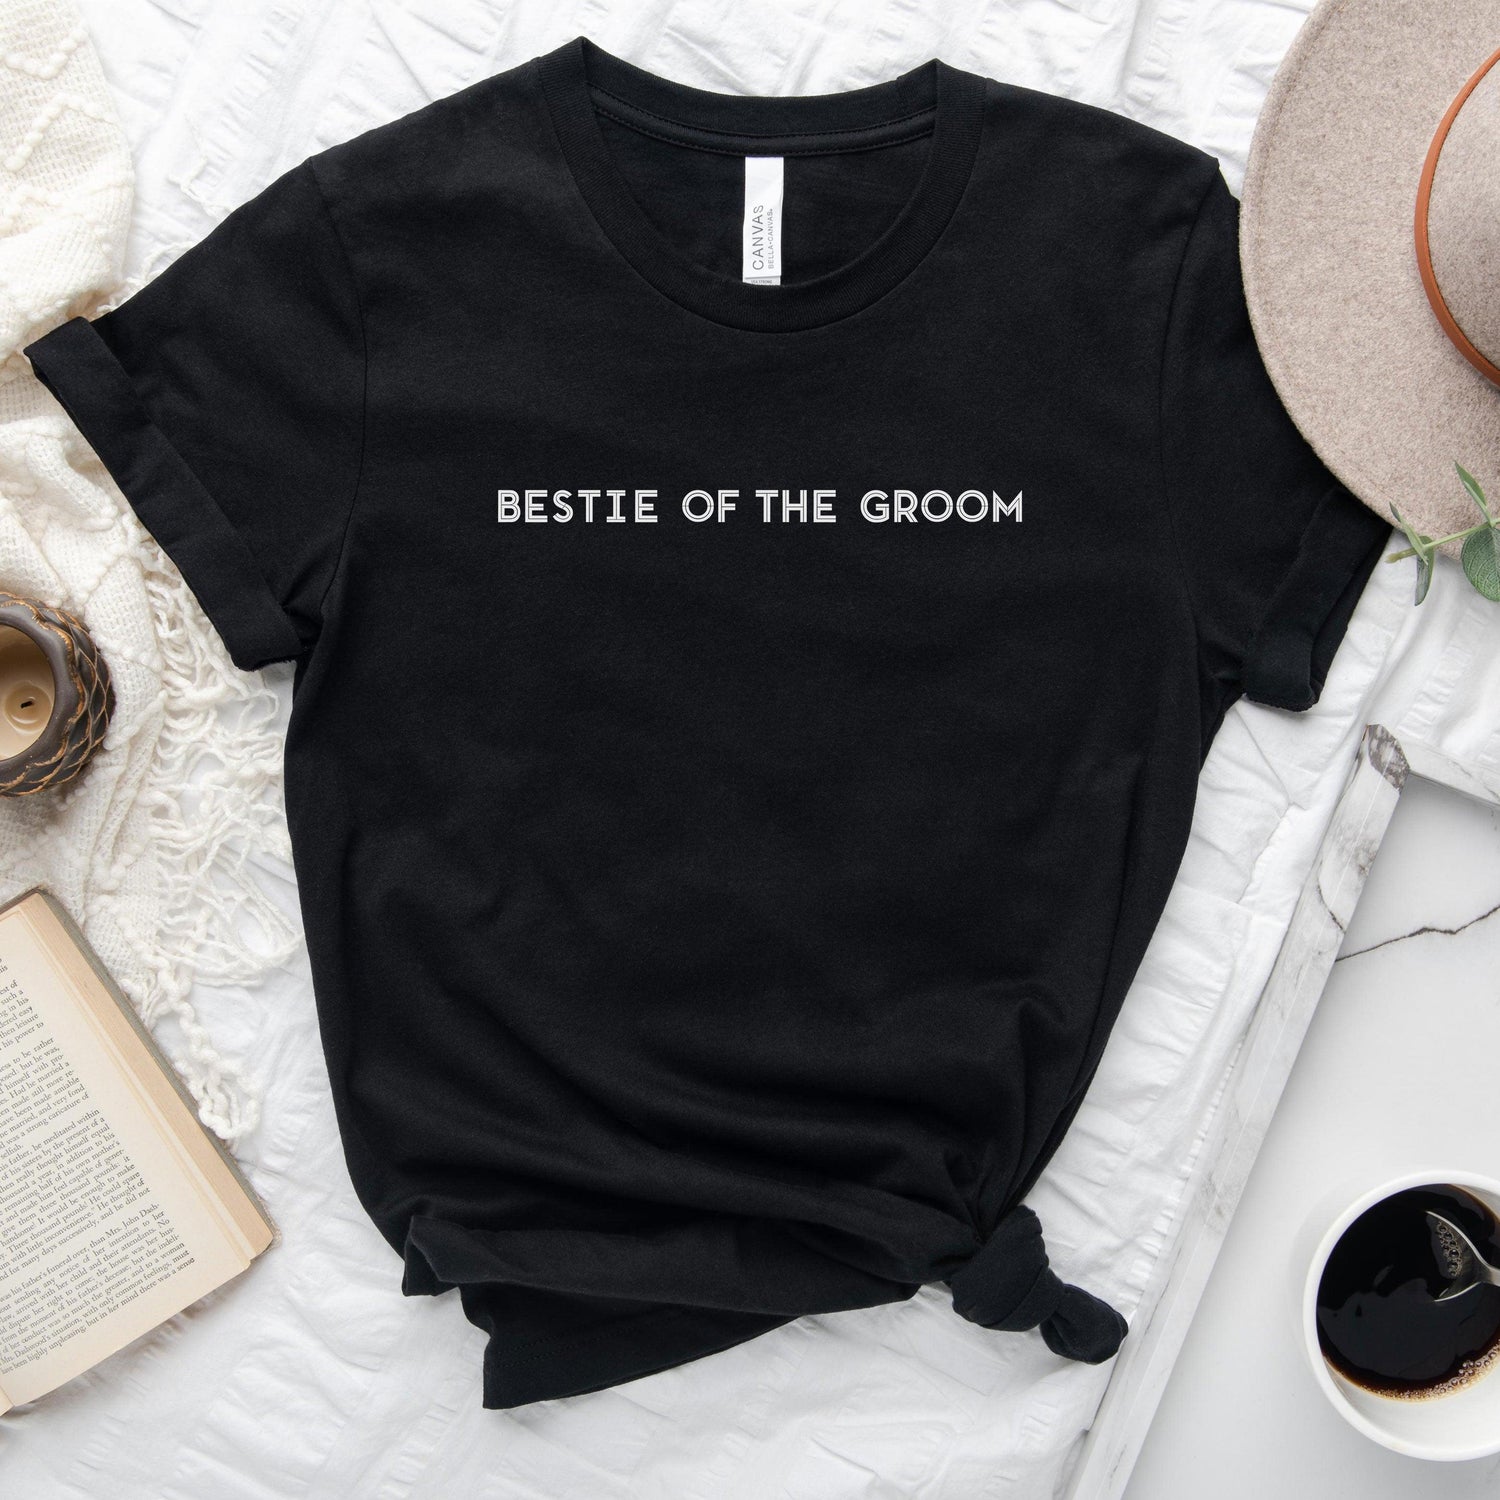 Bestie of the Groom - Unisex t-shirt - Wedding Party Matching Shirts - Bachelor Party by Oaklynn Lane - black tee